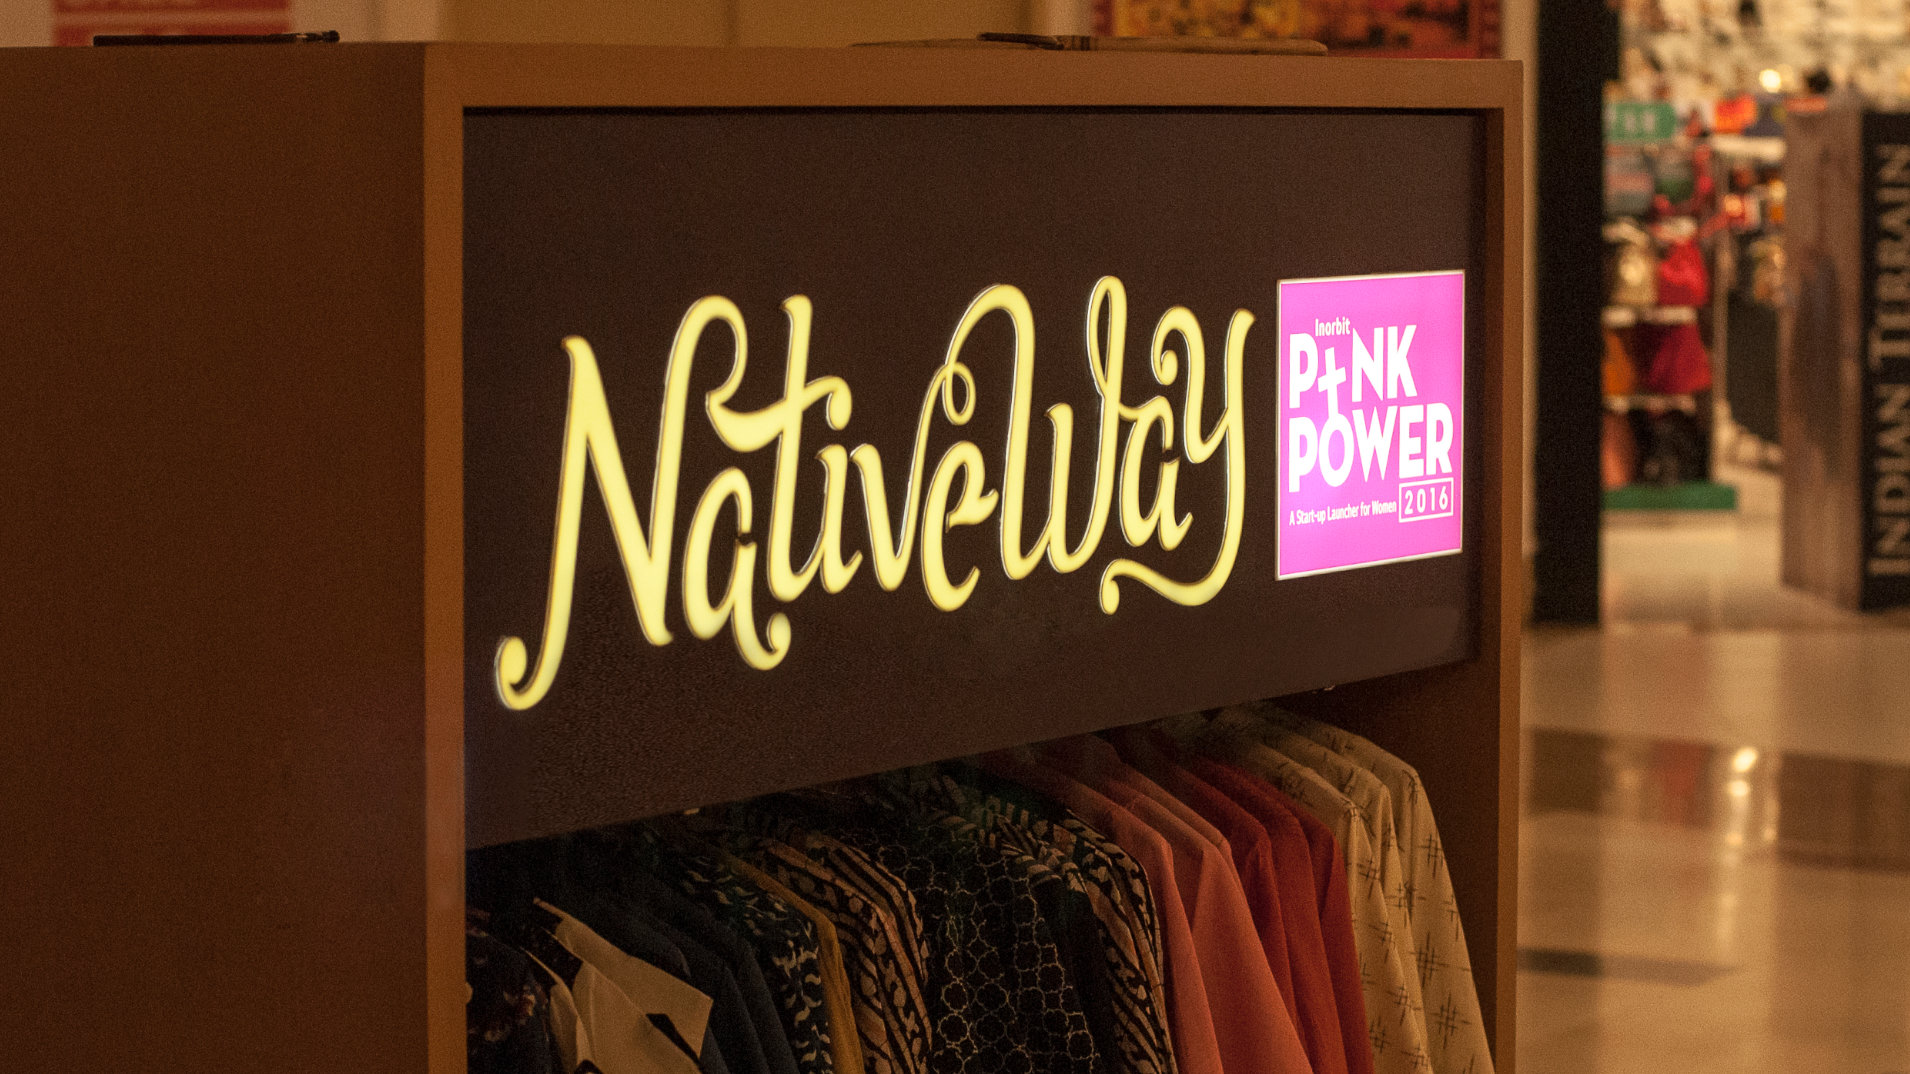 Signboard_ Nativeway :The project is an initiative by Inorbit Mall to empower women entrepreneurs.